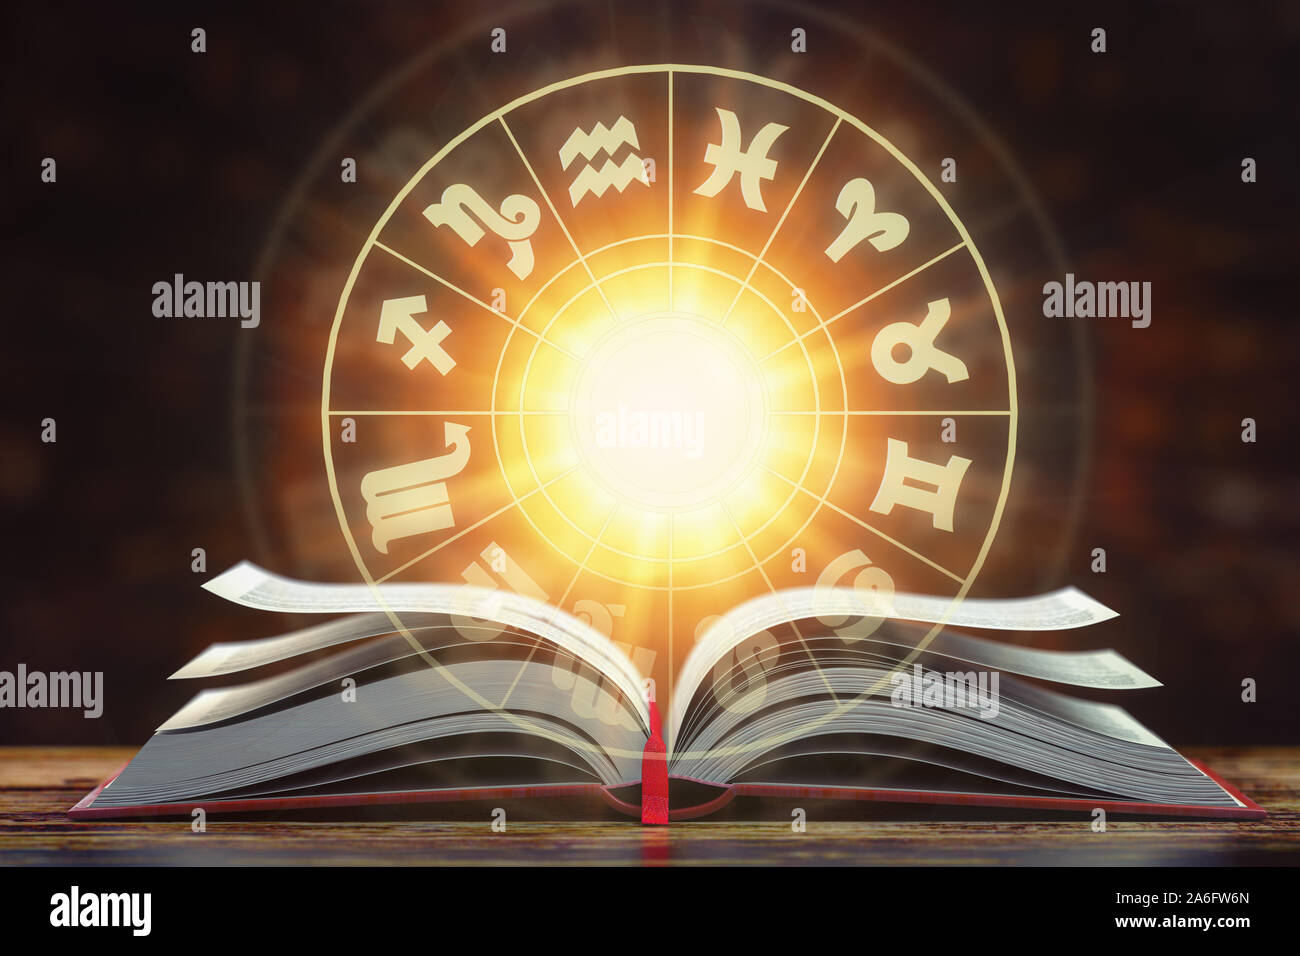 Astrology horoscope concept. Opened  book with magic zodiac signs and symbols. 3d illustration Stock Photo